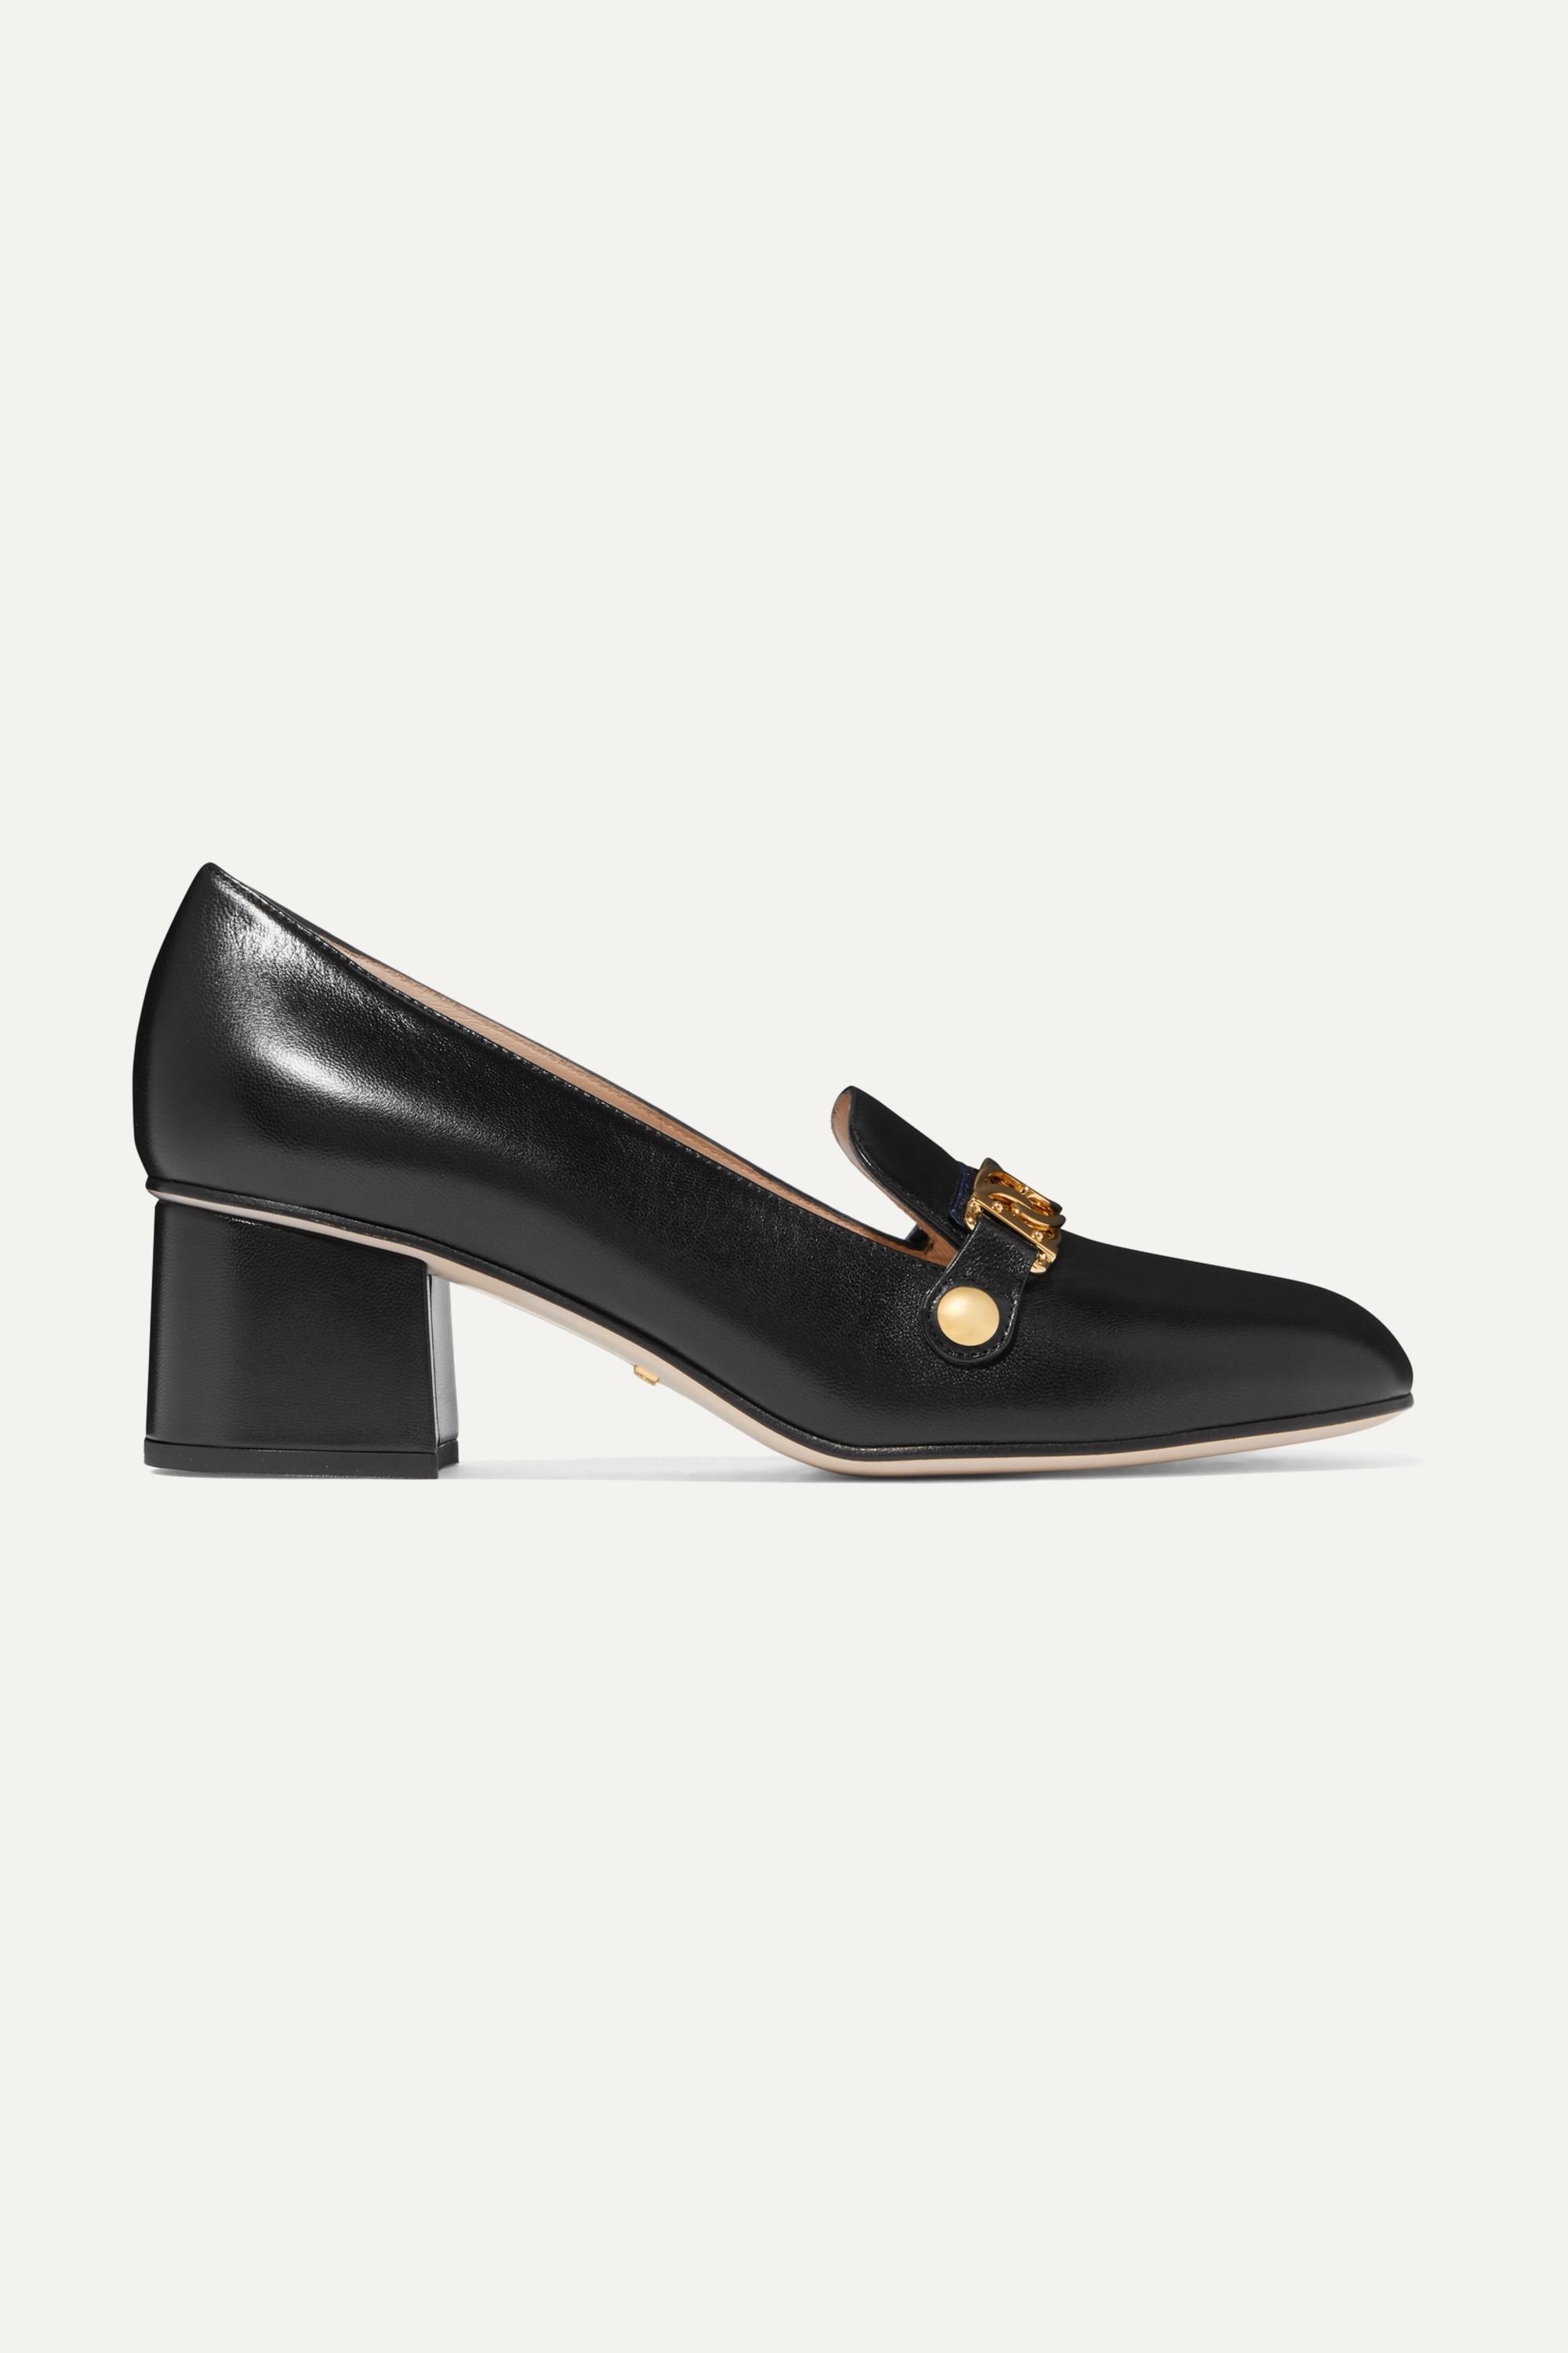 Gucci Sylvie Chain-embellished Leather Pumps in Black | Lyst